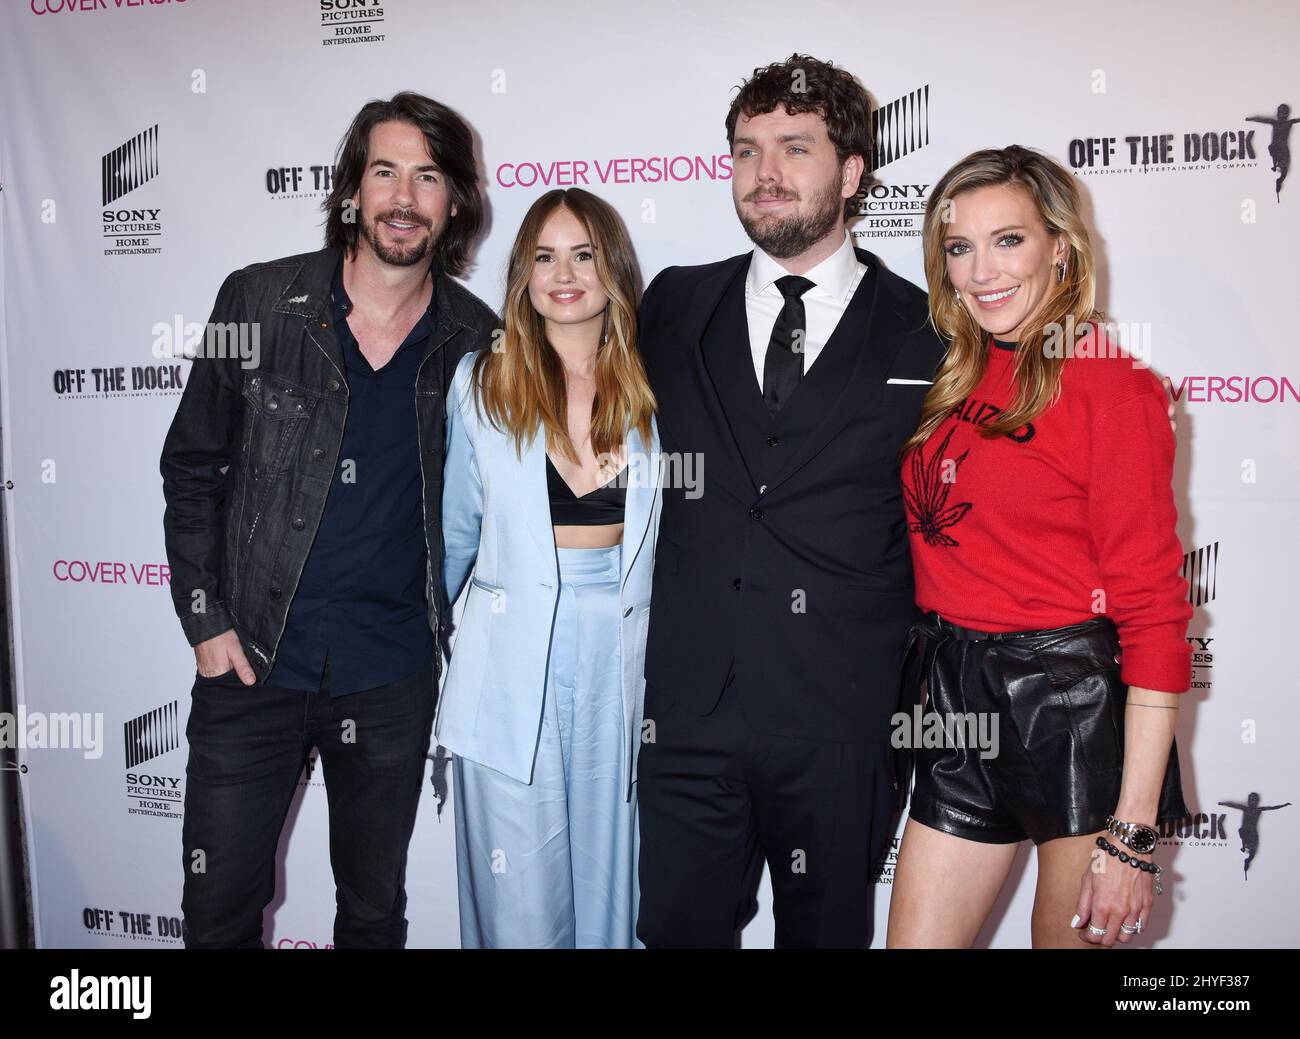 Jerry Trainor, Debby Ryan, Austin Swift and Katie Cassidy at the 'Cover Versions' Los Angeles Premiere held at the Landmark Regent Theatre on April 9, 2018 in Westwood, USA Stock Photo